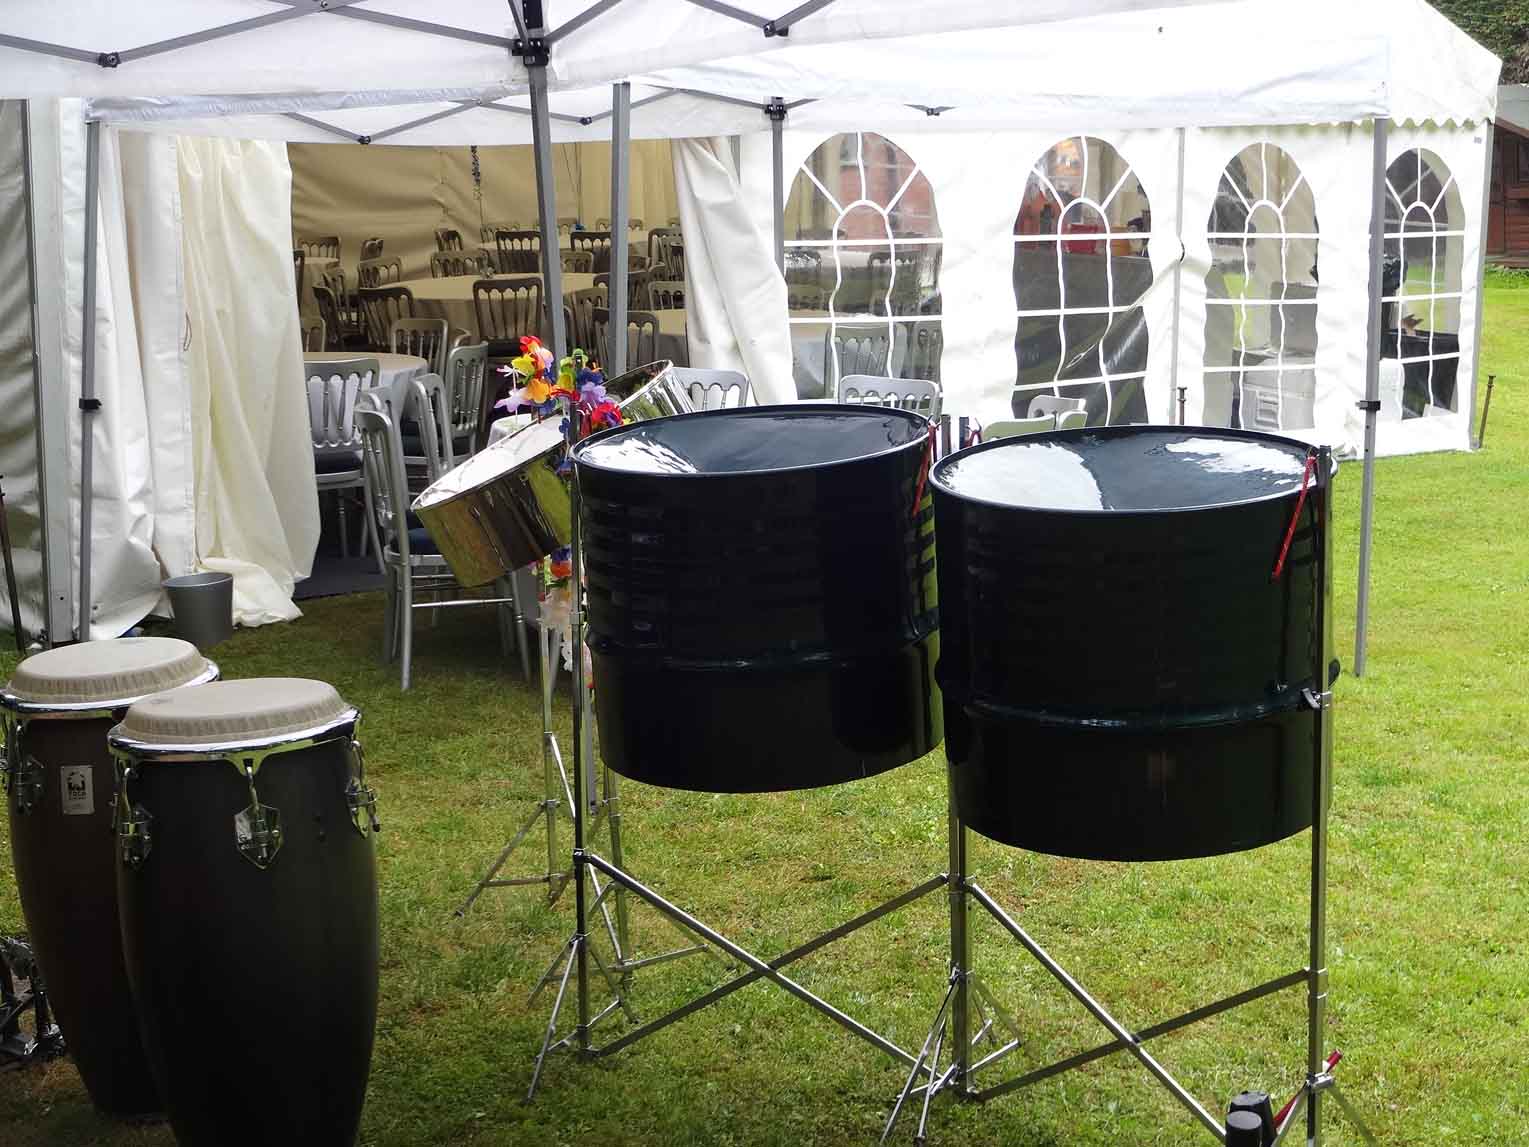 Three-piece steel drum band performing at a private summer drinks party outside a marquee, providing vibrant entertainment for the event.